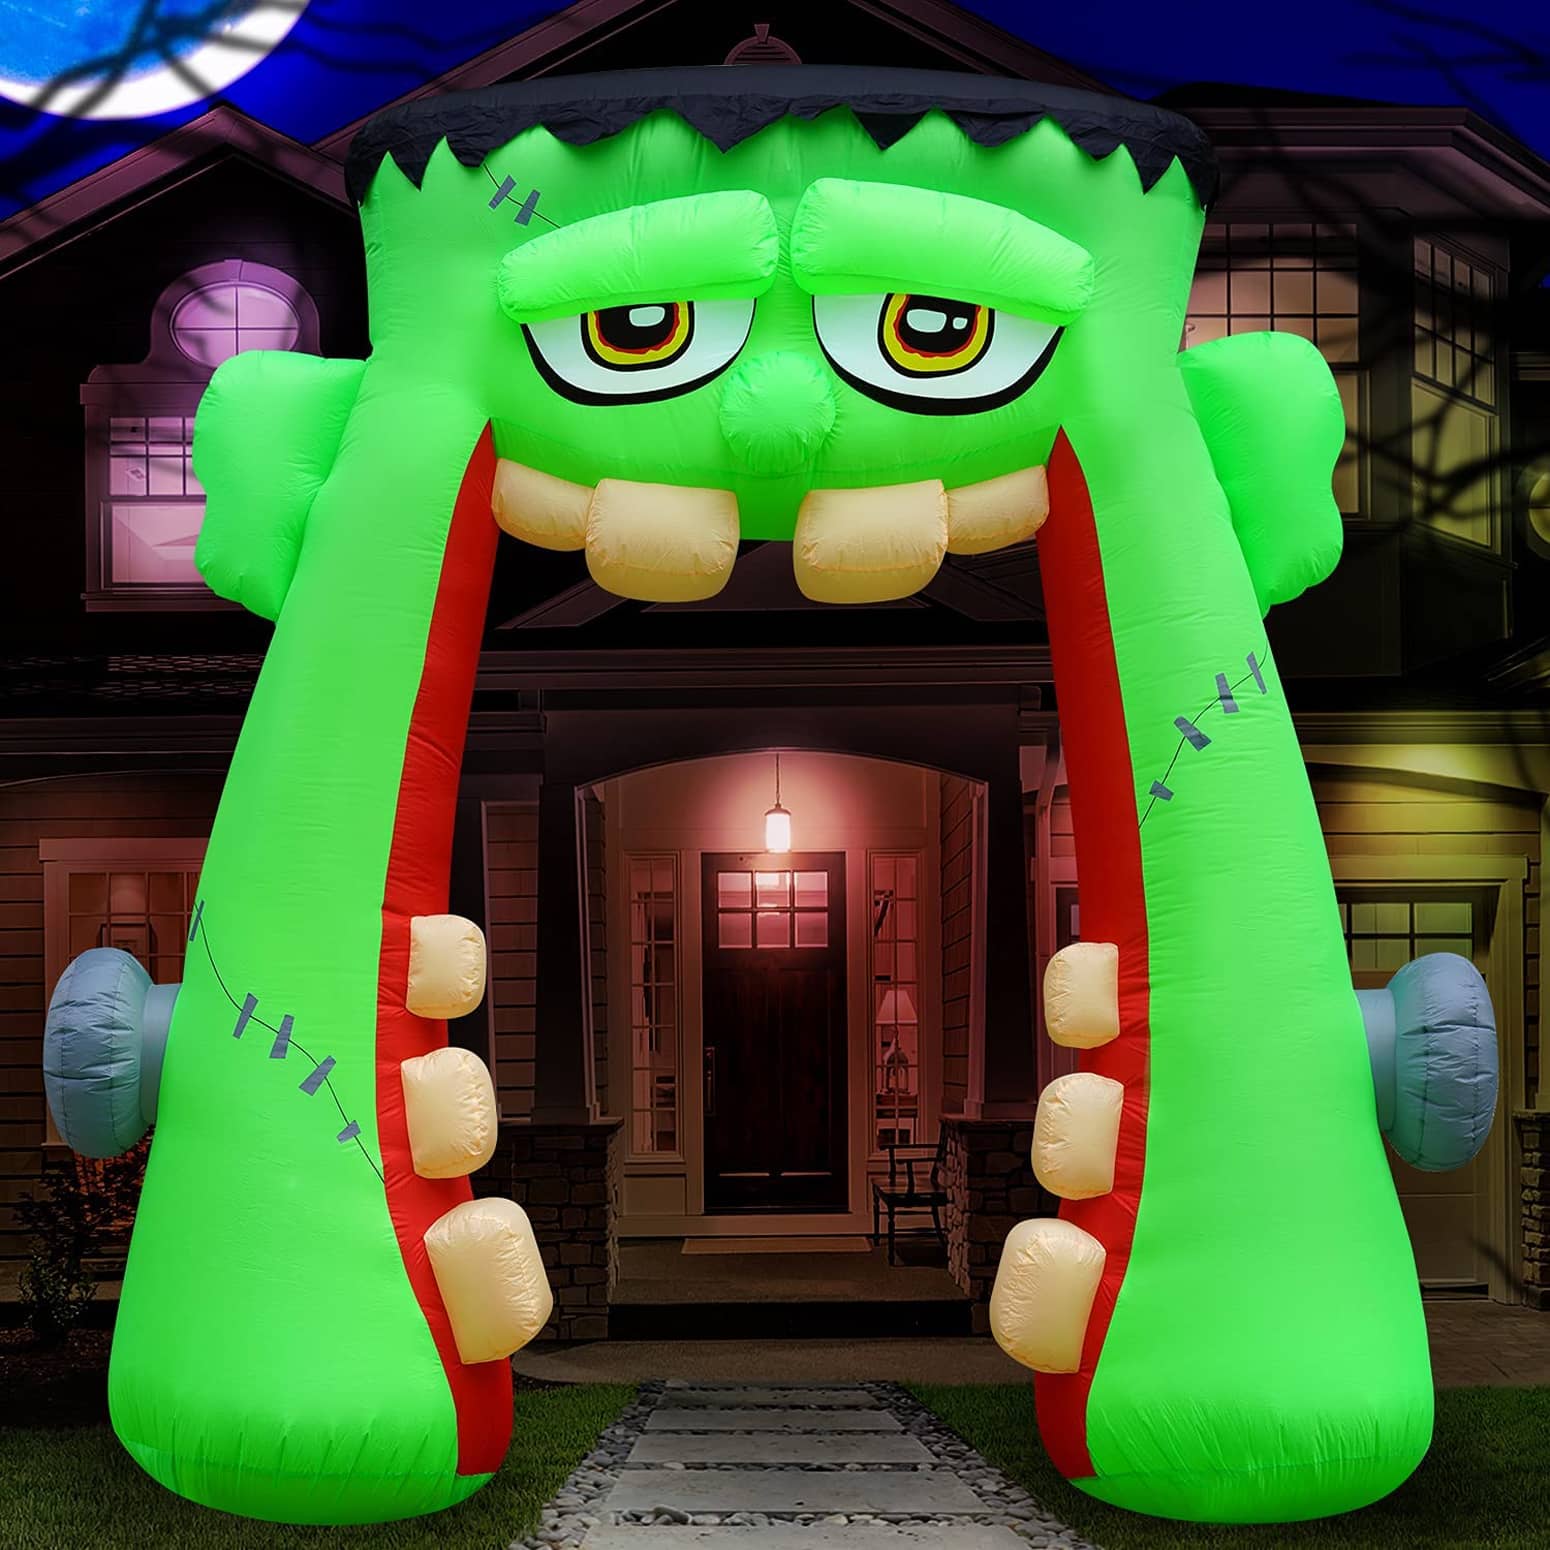 Massive Inflatable Frankenstein Monster Mouth Archway - 10 Foot Tall!